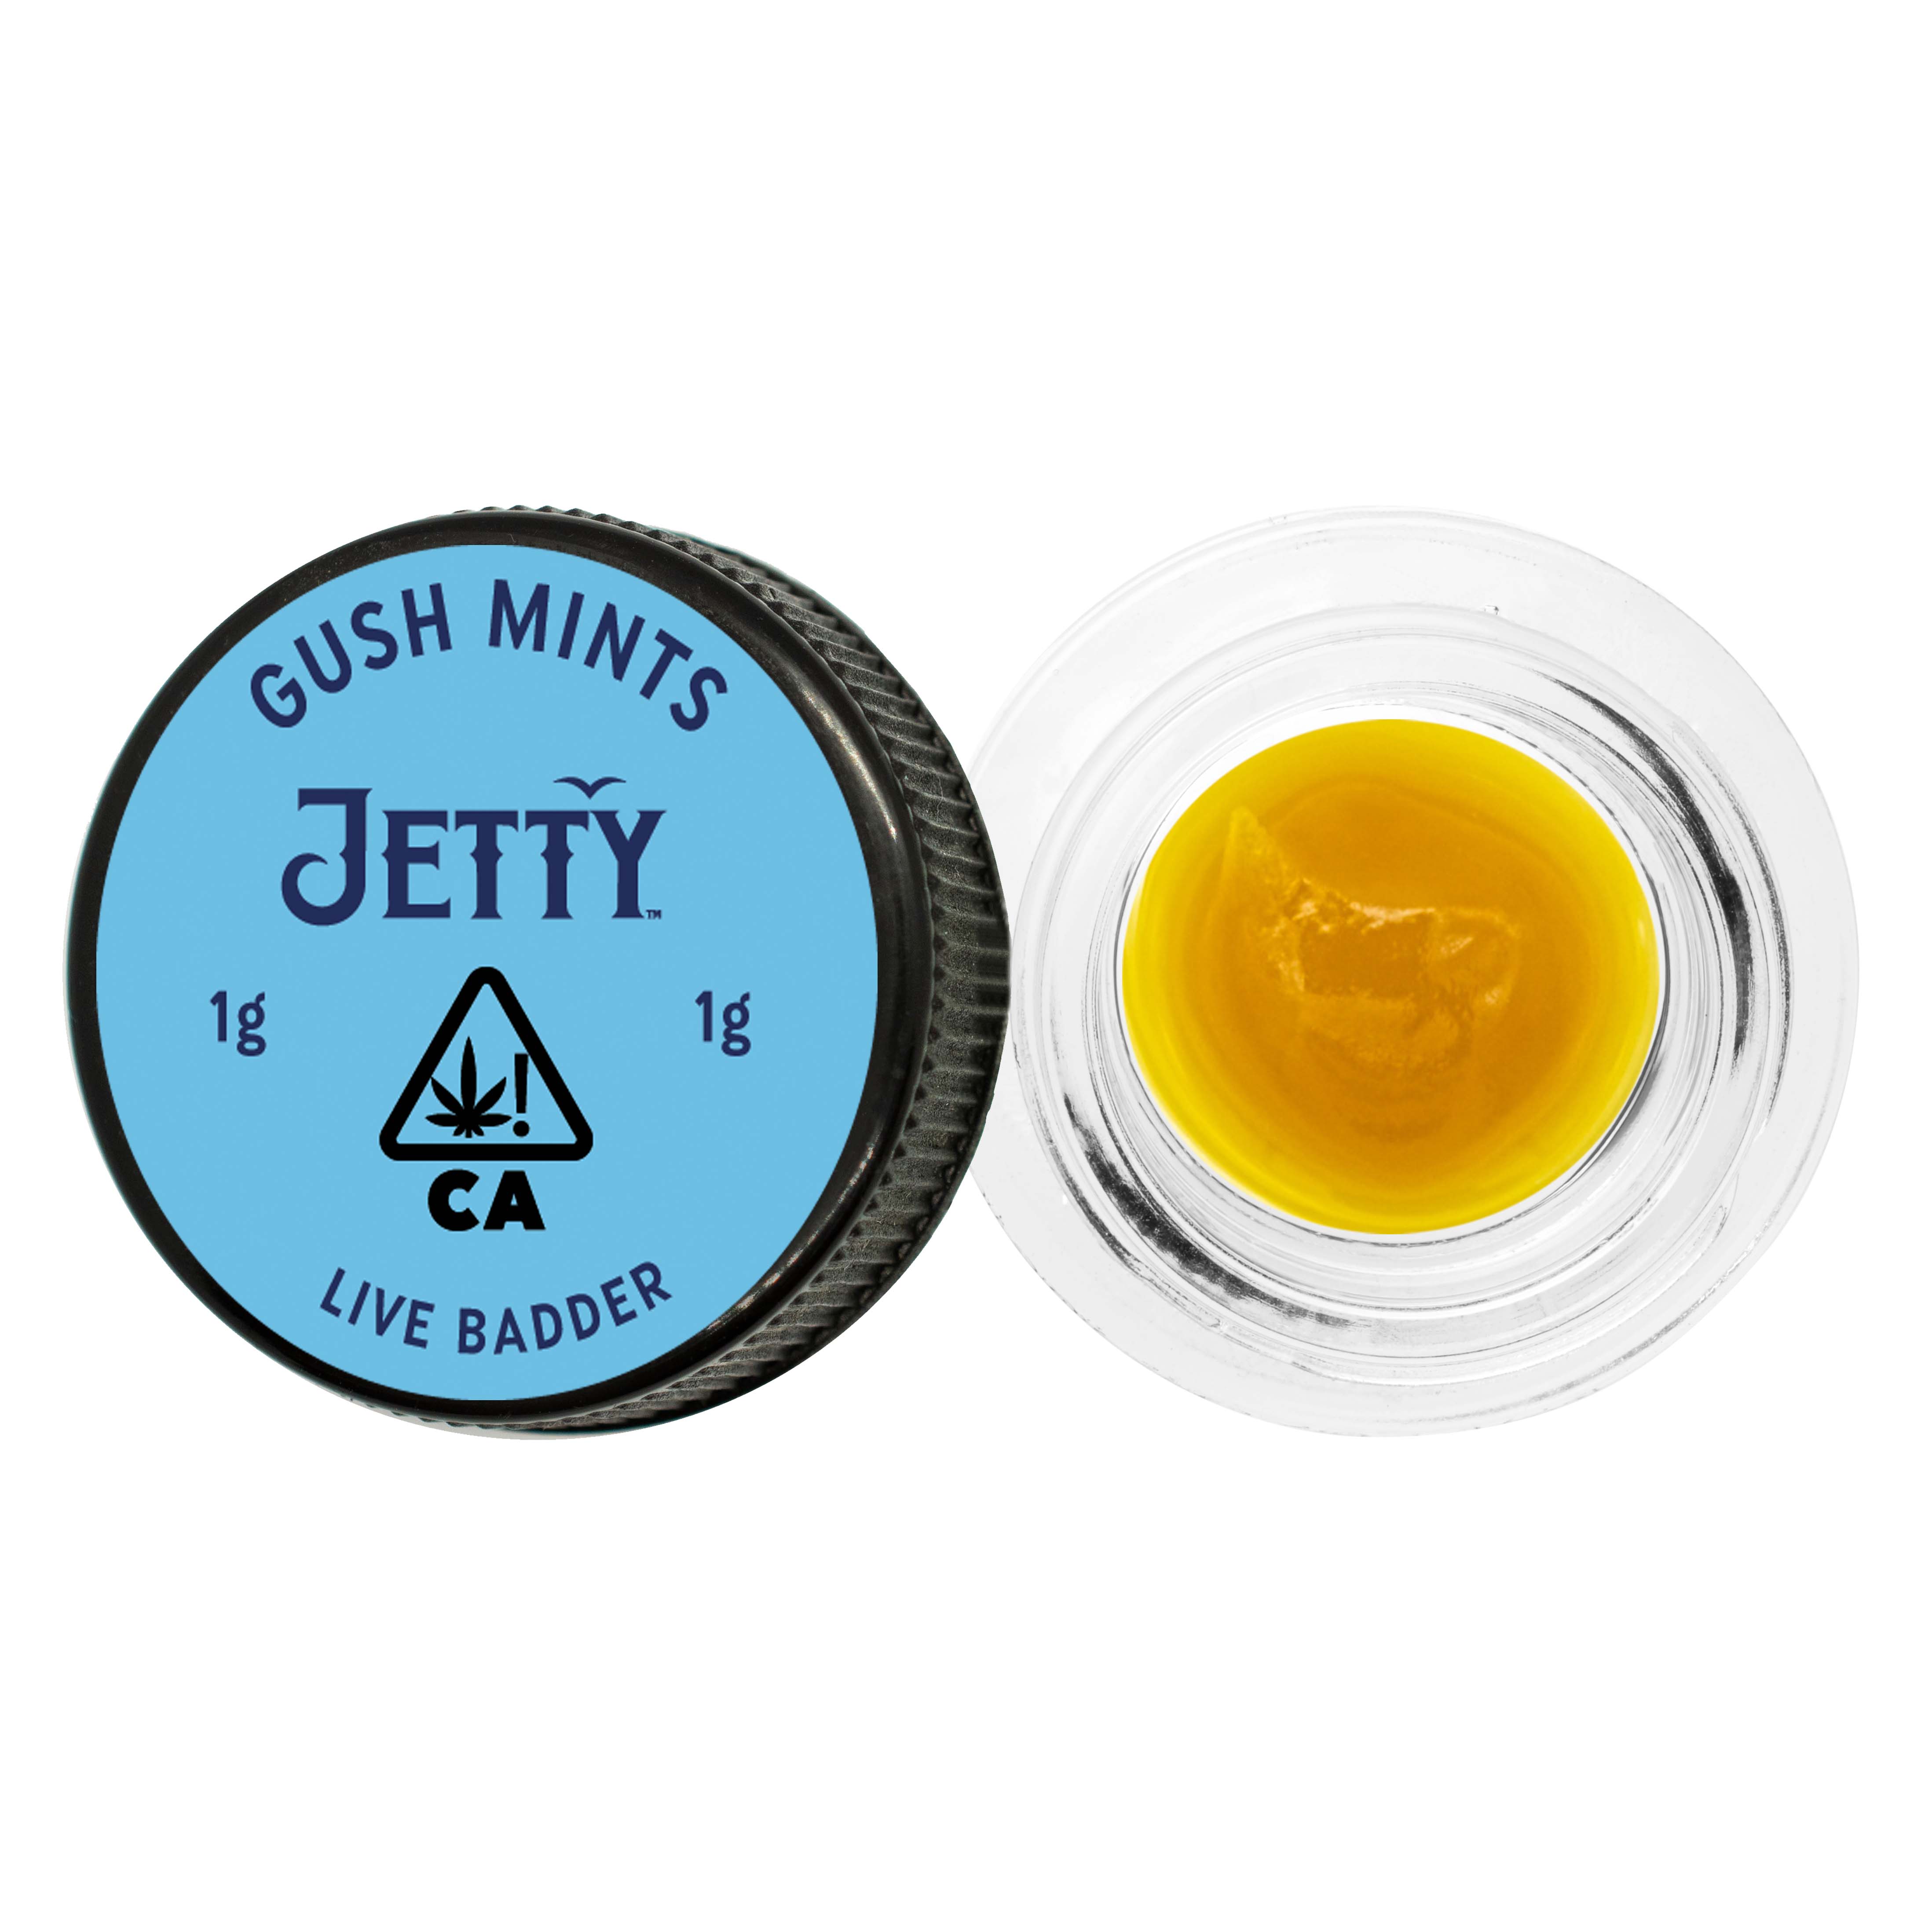 A photograph of Jetty Live Badder 1g Gush Mints